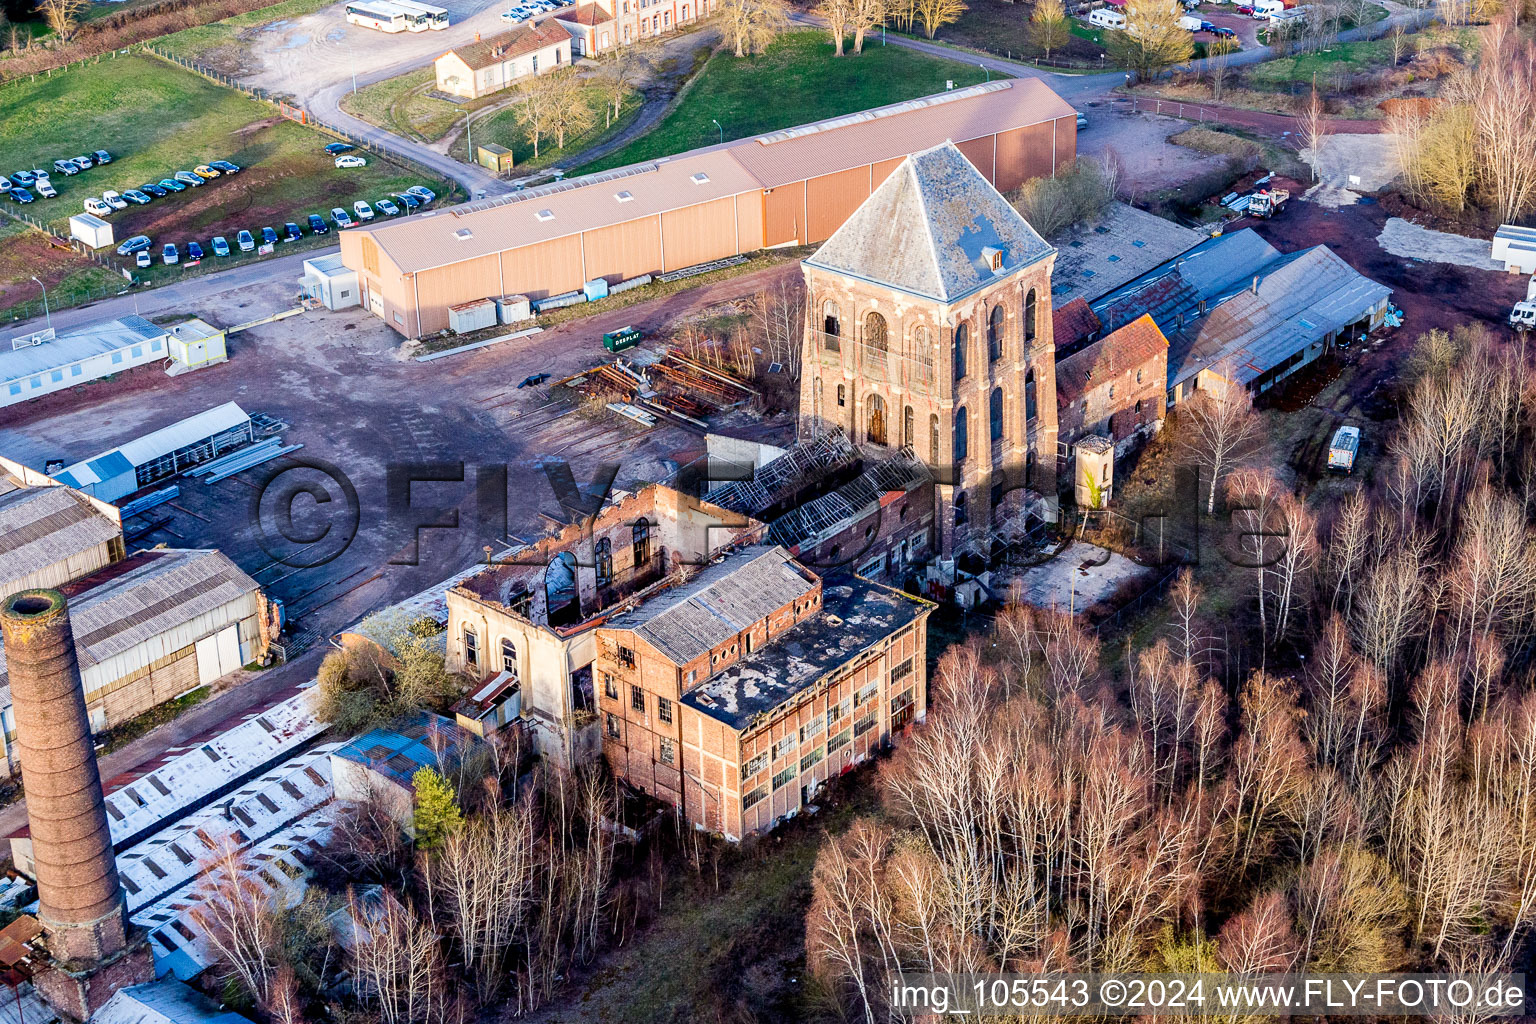 Aerial view of Demolition work on the conveyors and mining pits at the former headframe of iron foundry in Epinac in Bourgogne-Franche-Comte, France